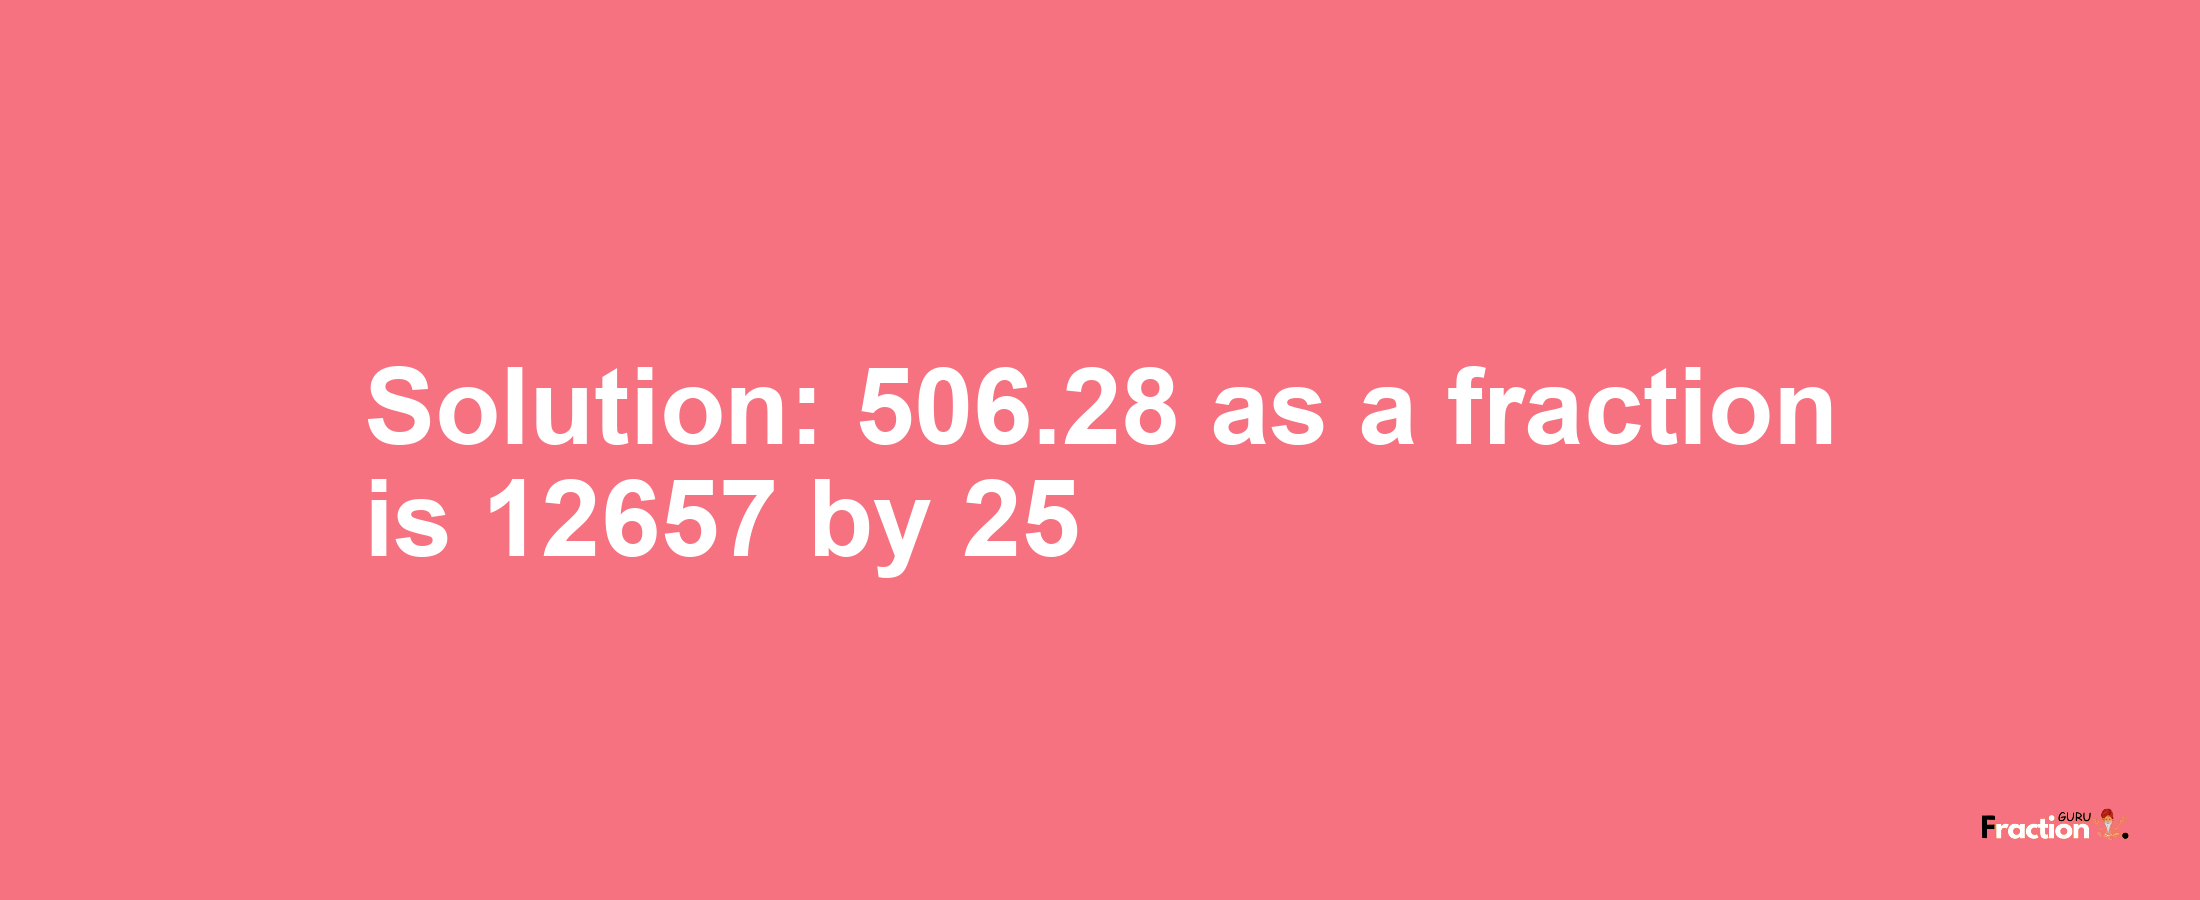 Solution:506.28 as a fraction is 12657/25